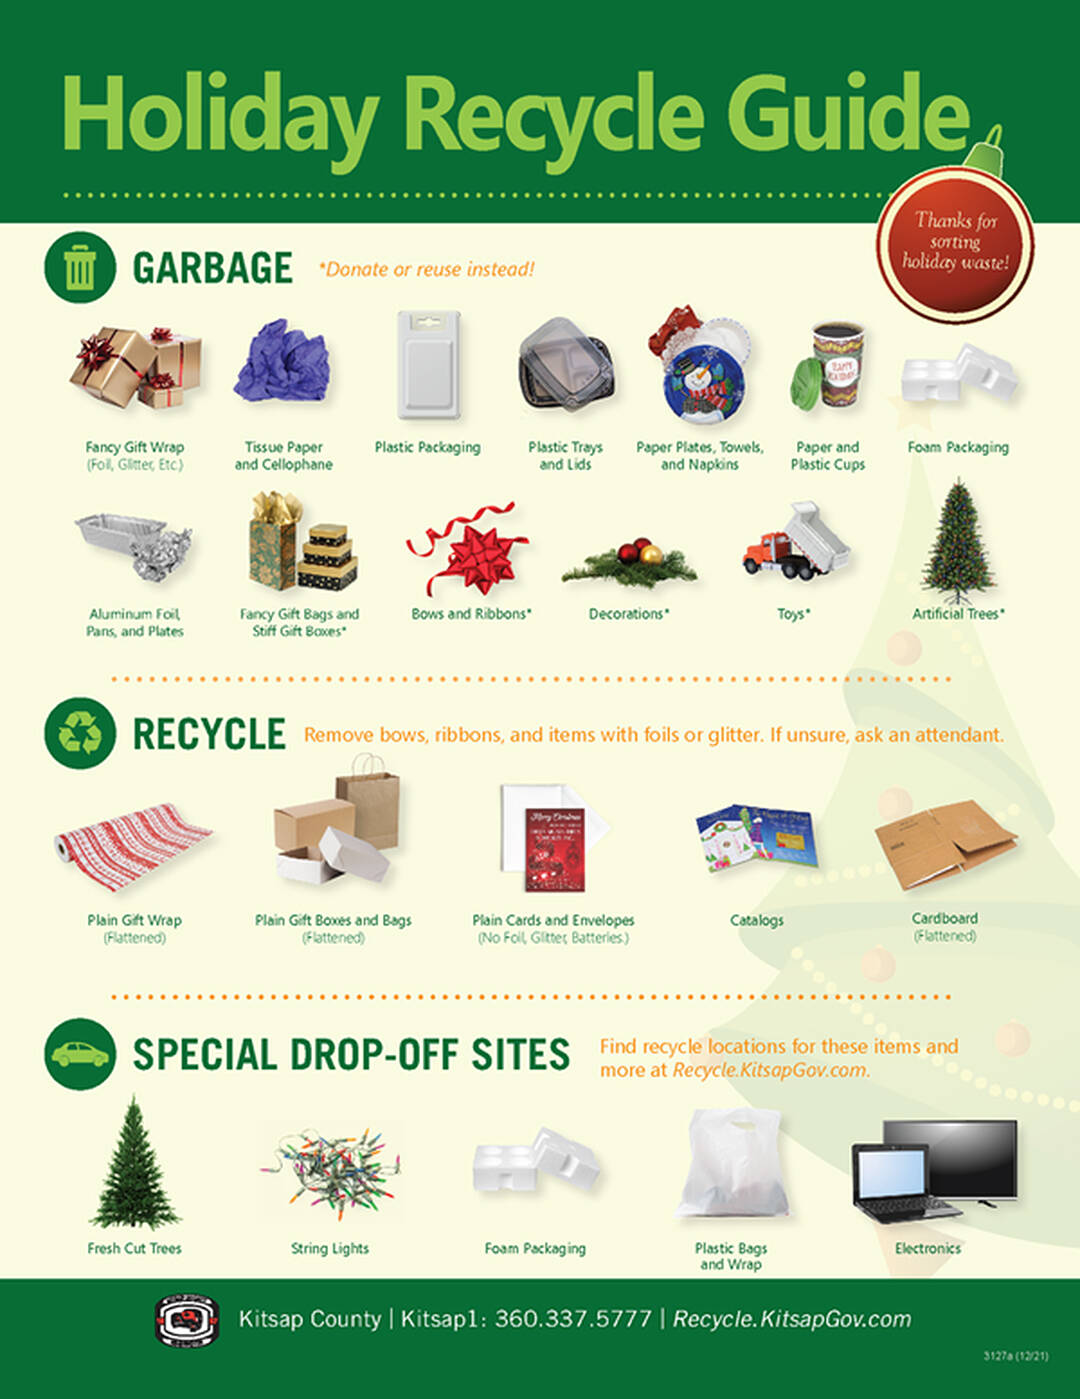 Recycle the holidays - resources and tips for recycling after the holidays  from the Green Holidays Web site and King County’s EcoConsumer  program. - King County, Washington